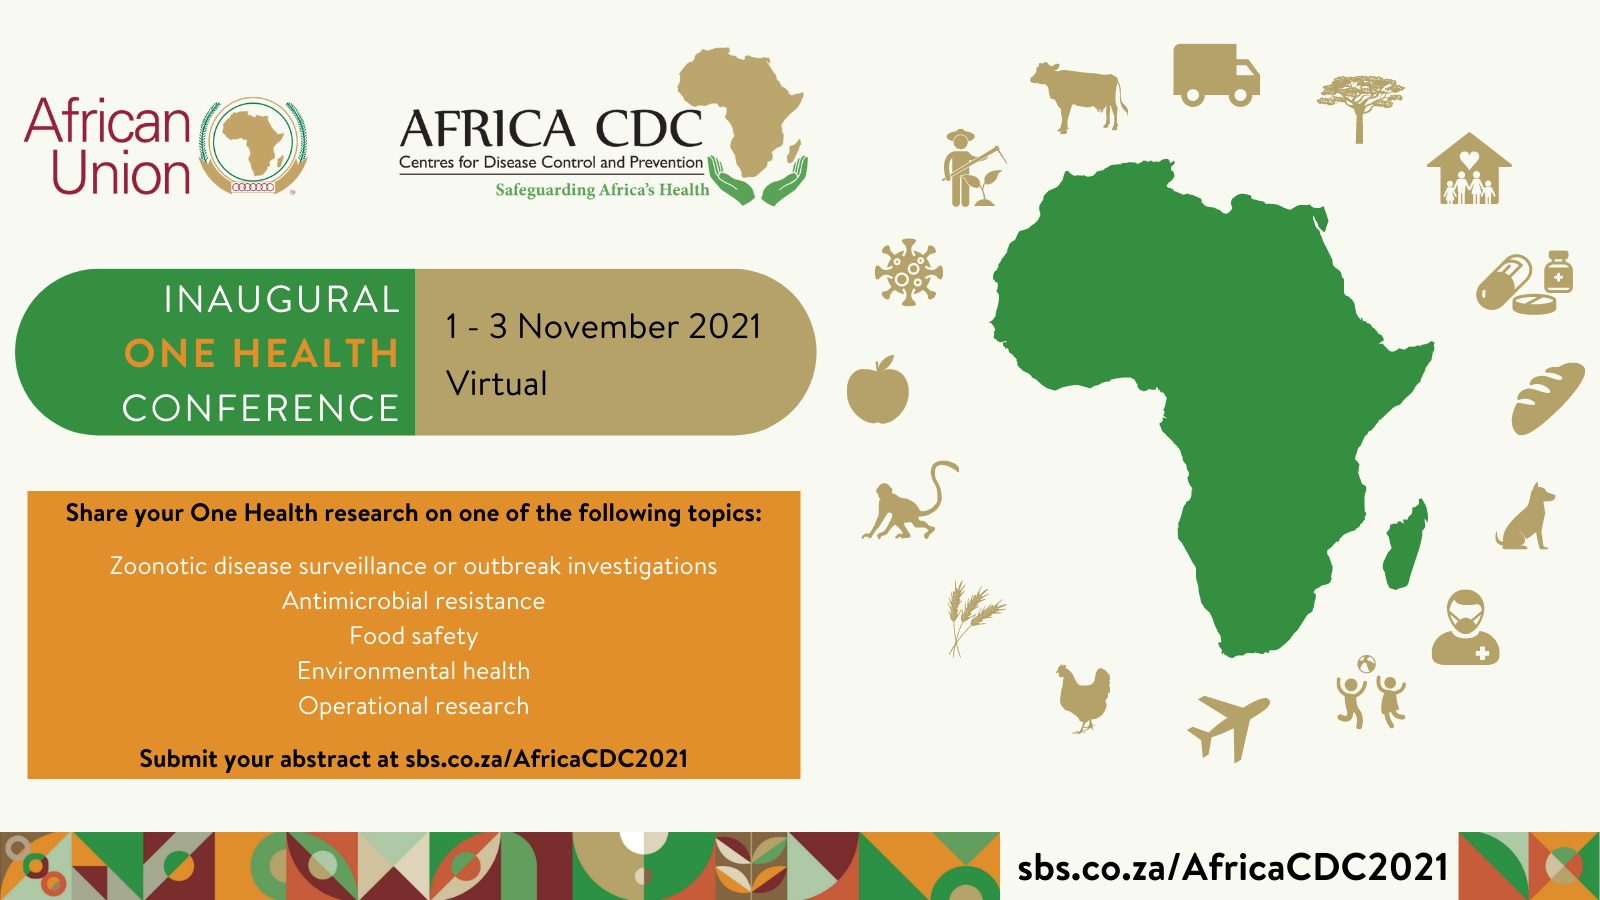 cdc travel south africa clinician view